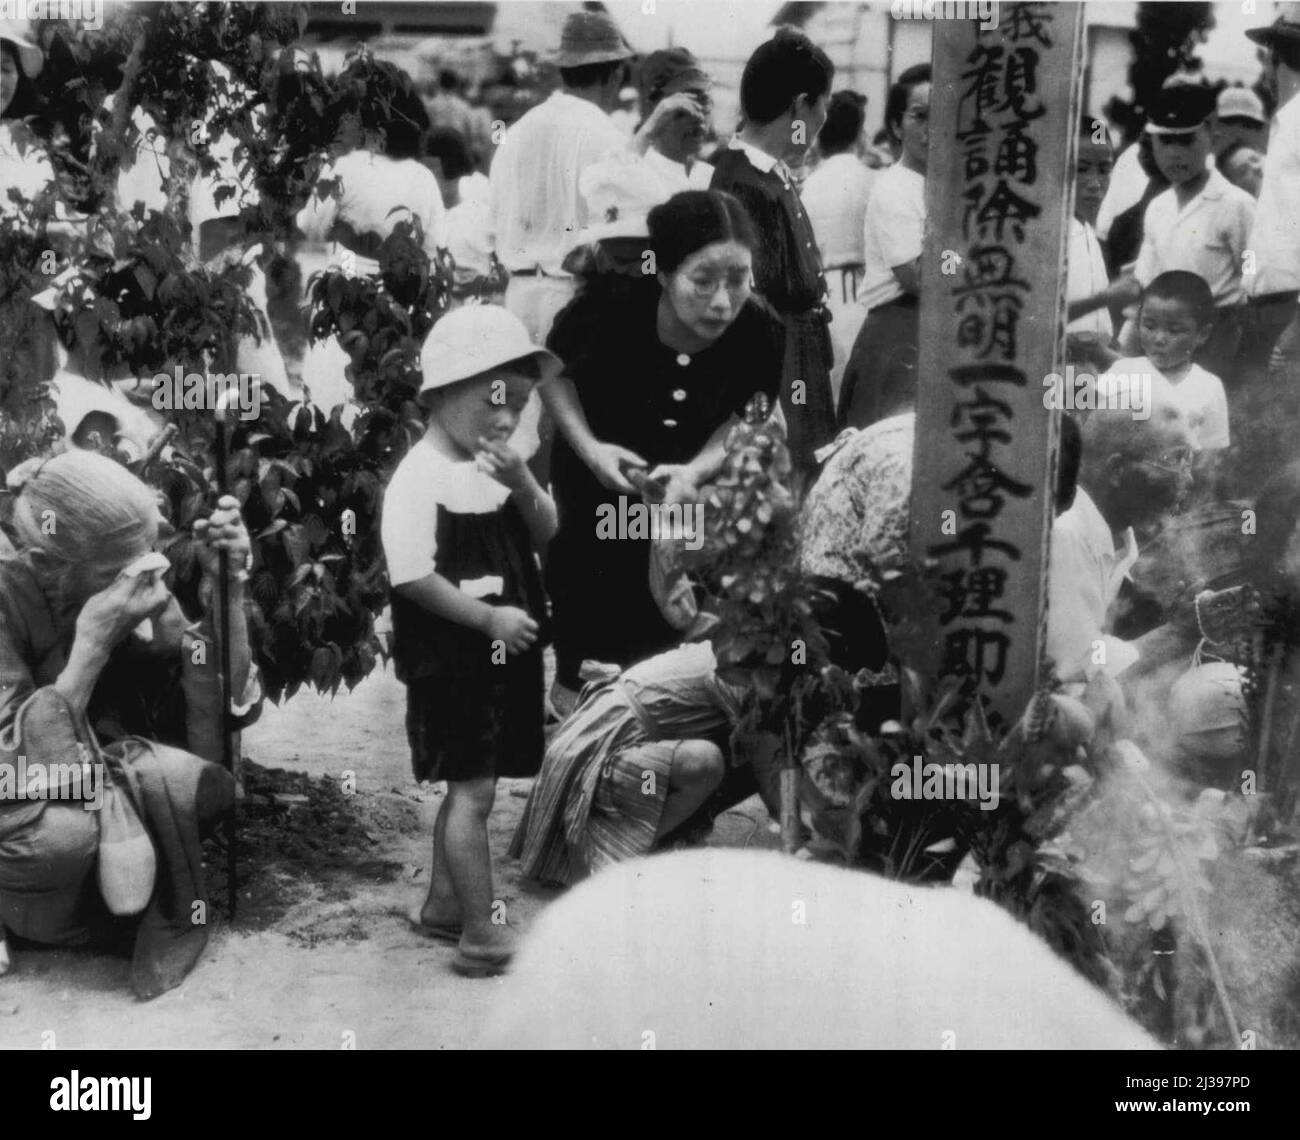 Flowers At Mass Grave Of Atom Bomb Victims -- Relatives and friends place flowers at the mass grave for thousands of unidentified victims of the atom bombing of Hiroshima Aug. 6, 1945. The second anniversary of the bombing was observed with a three-day peace festival field by survivors of the bombing. August 16, 1947. (Photo by AP Wirephoto). Stock Photo